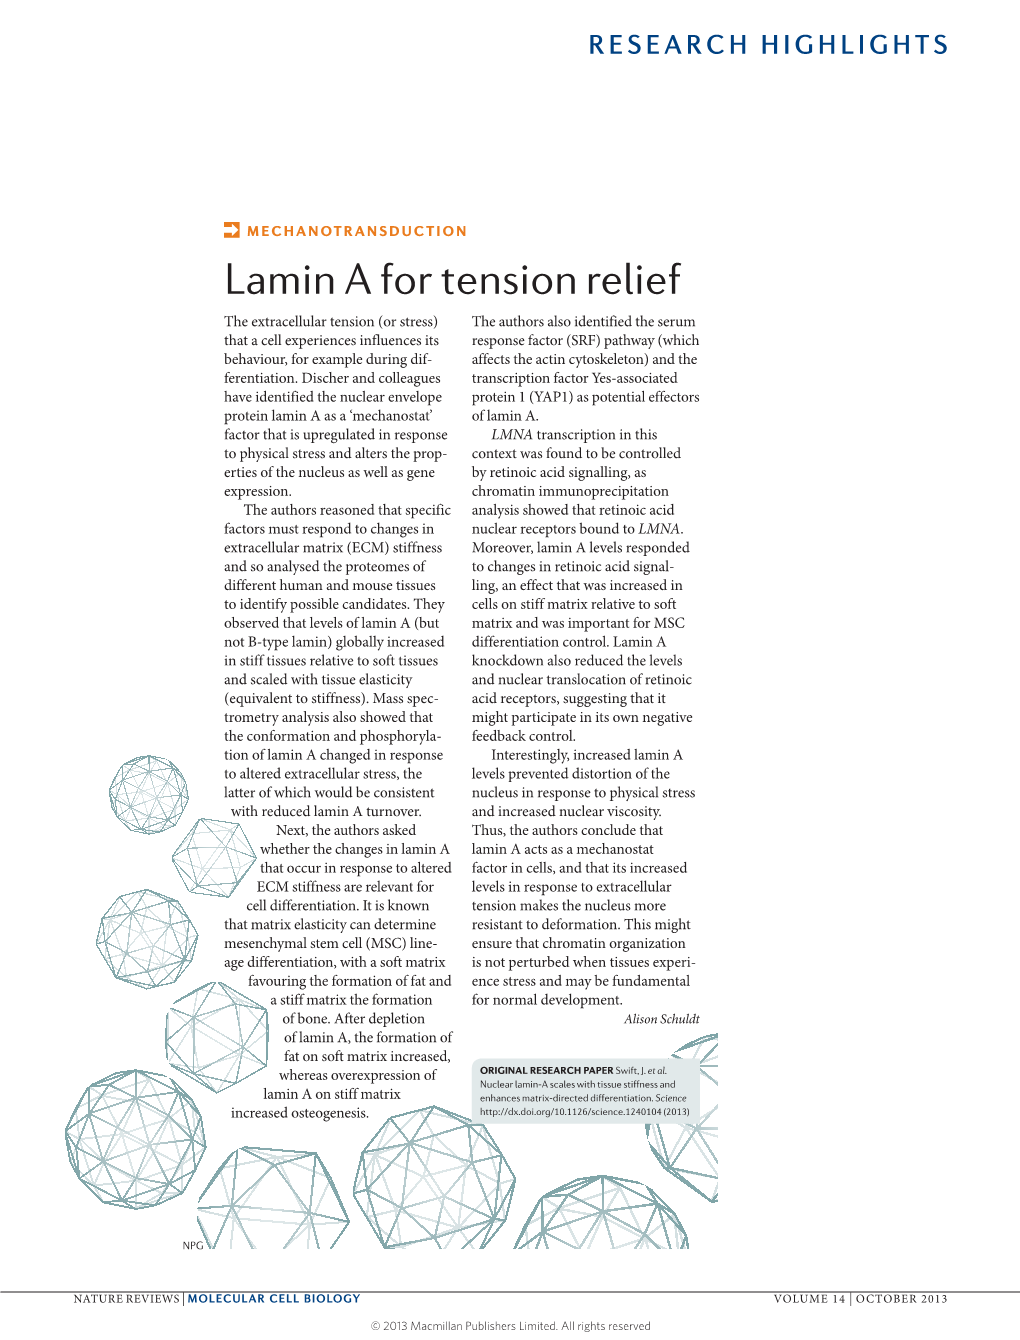 Mechanotransduction: Lamin a for Tension Relief